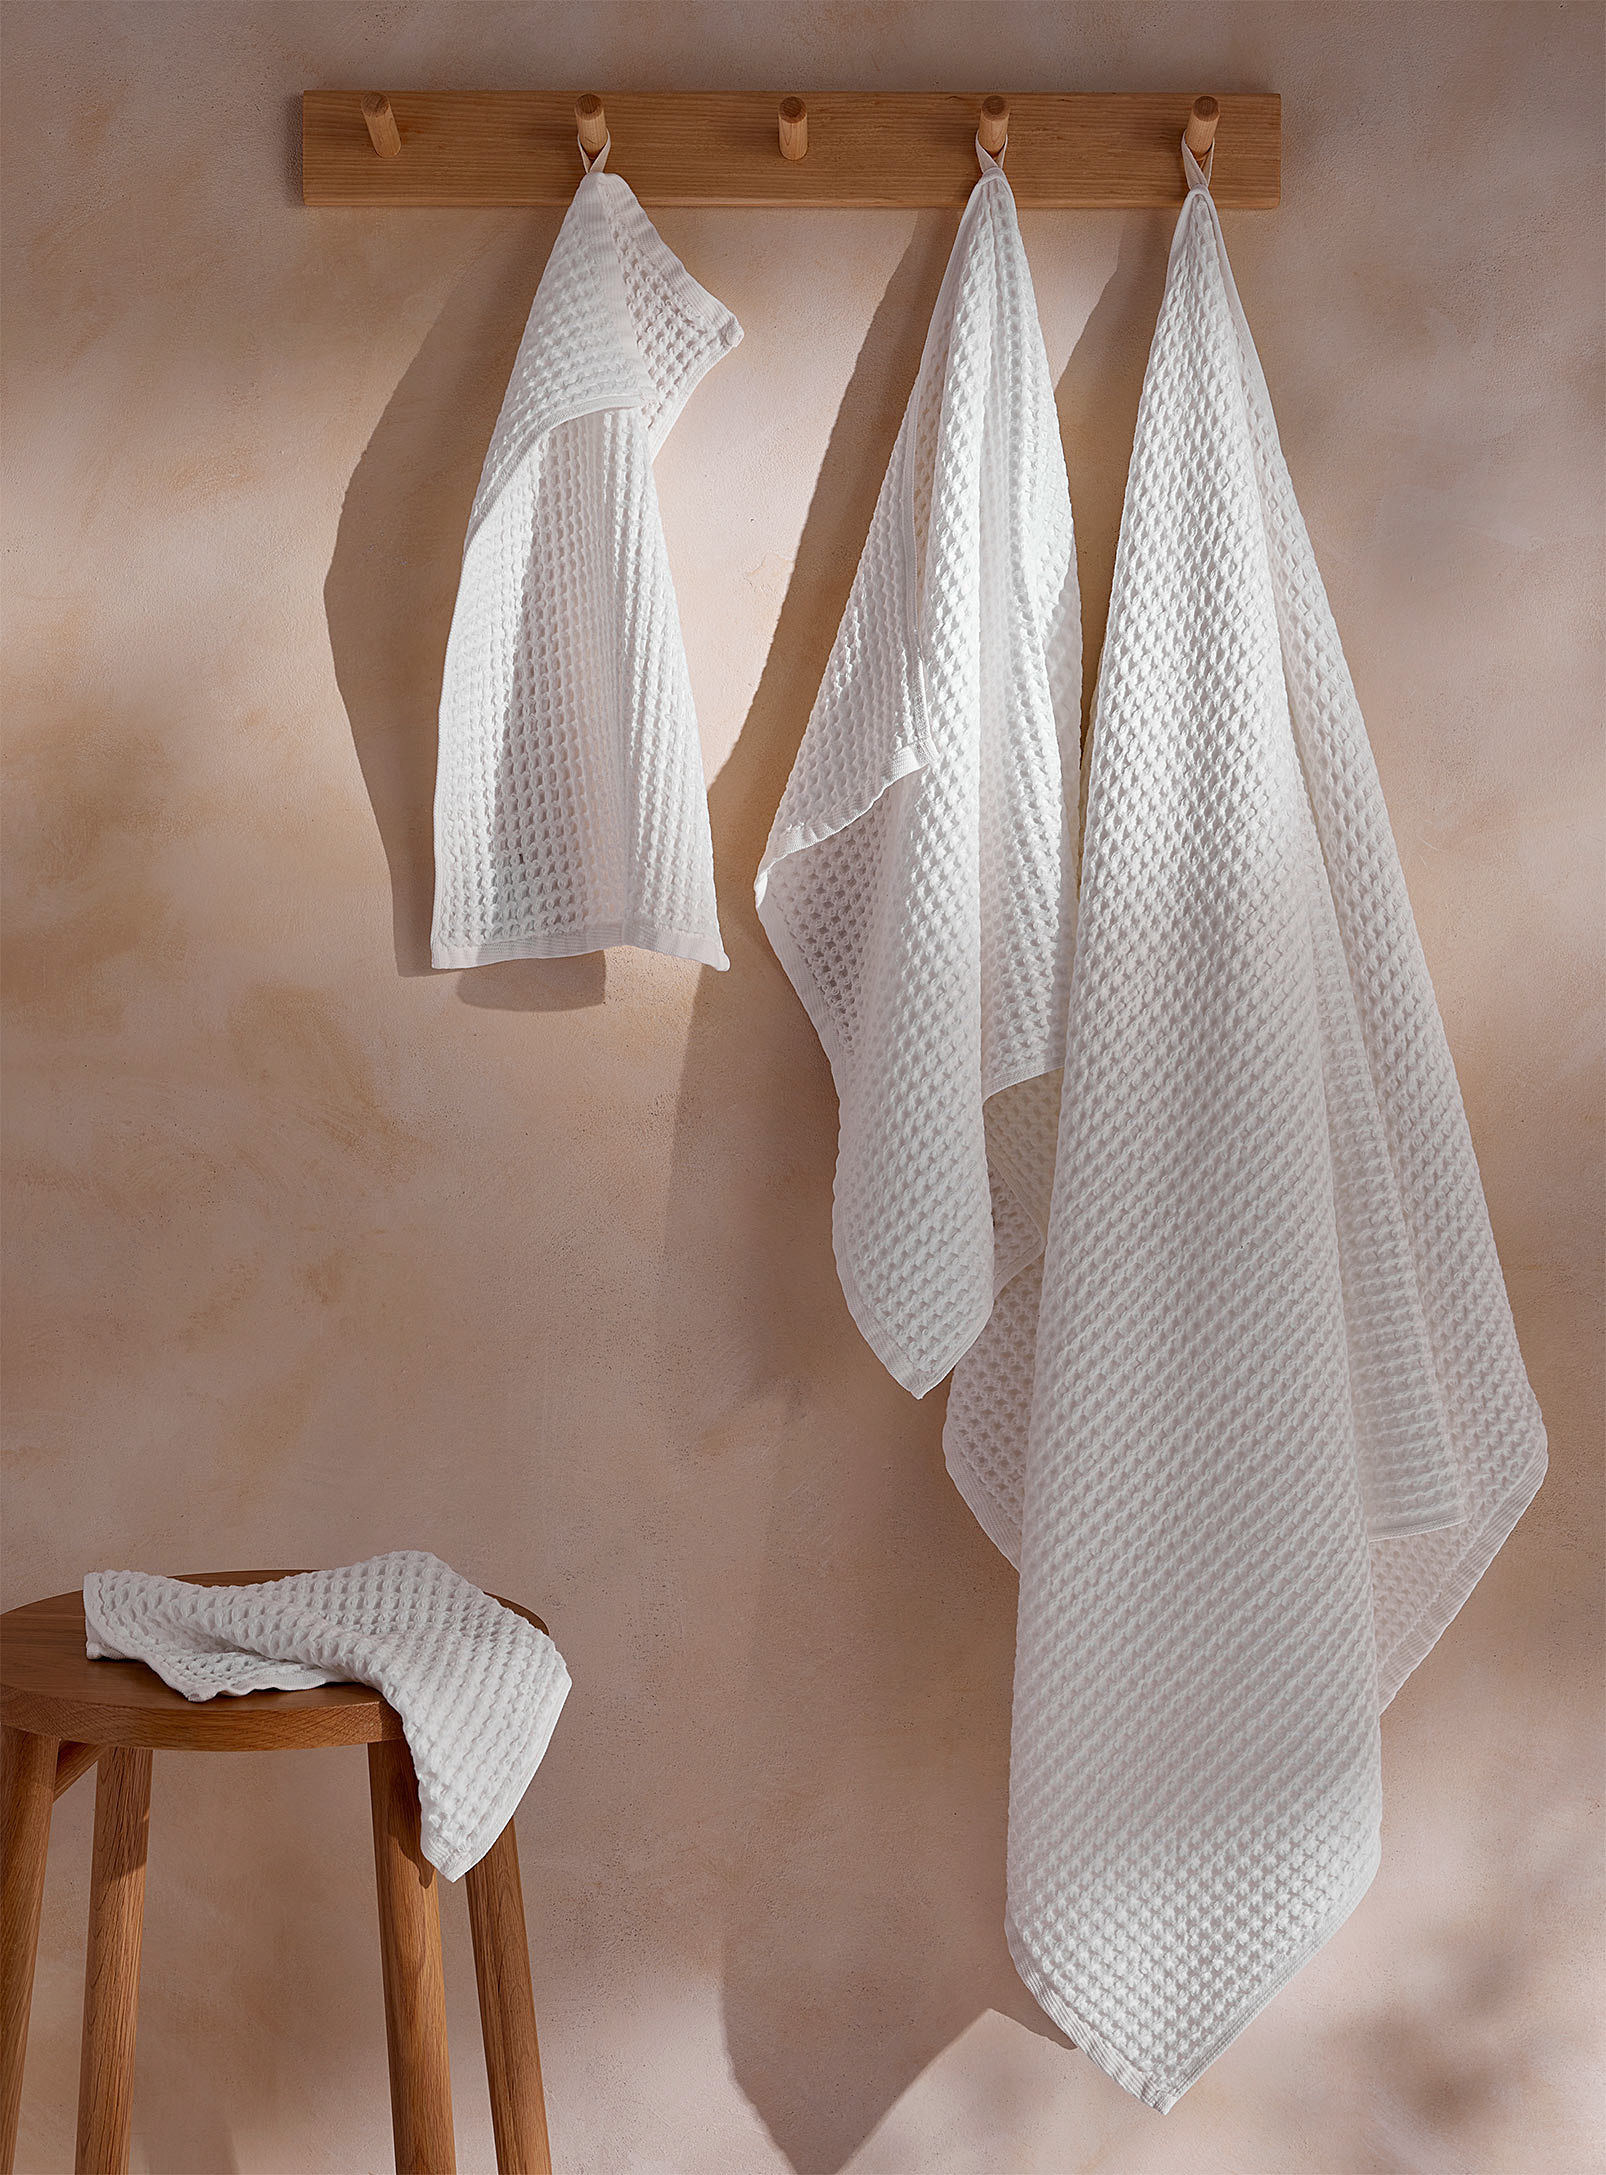 Simons Maison Waffled Towels In White